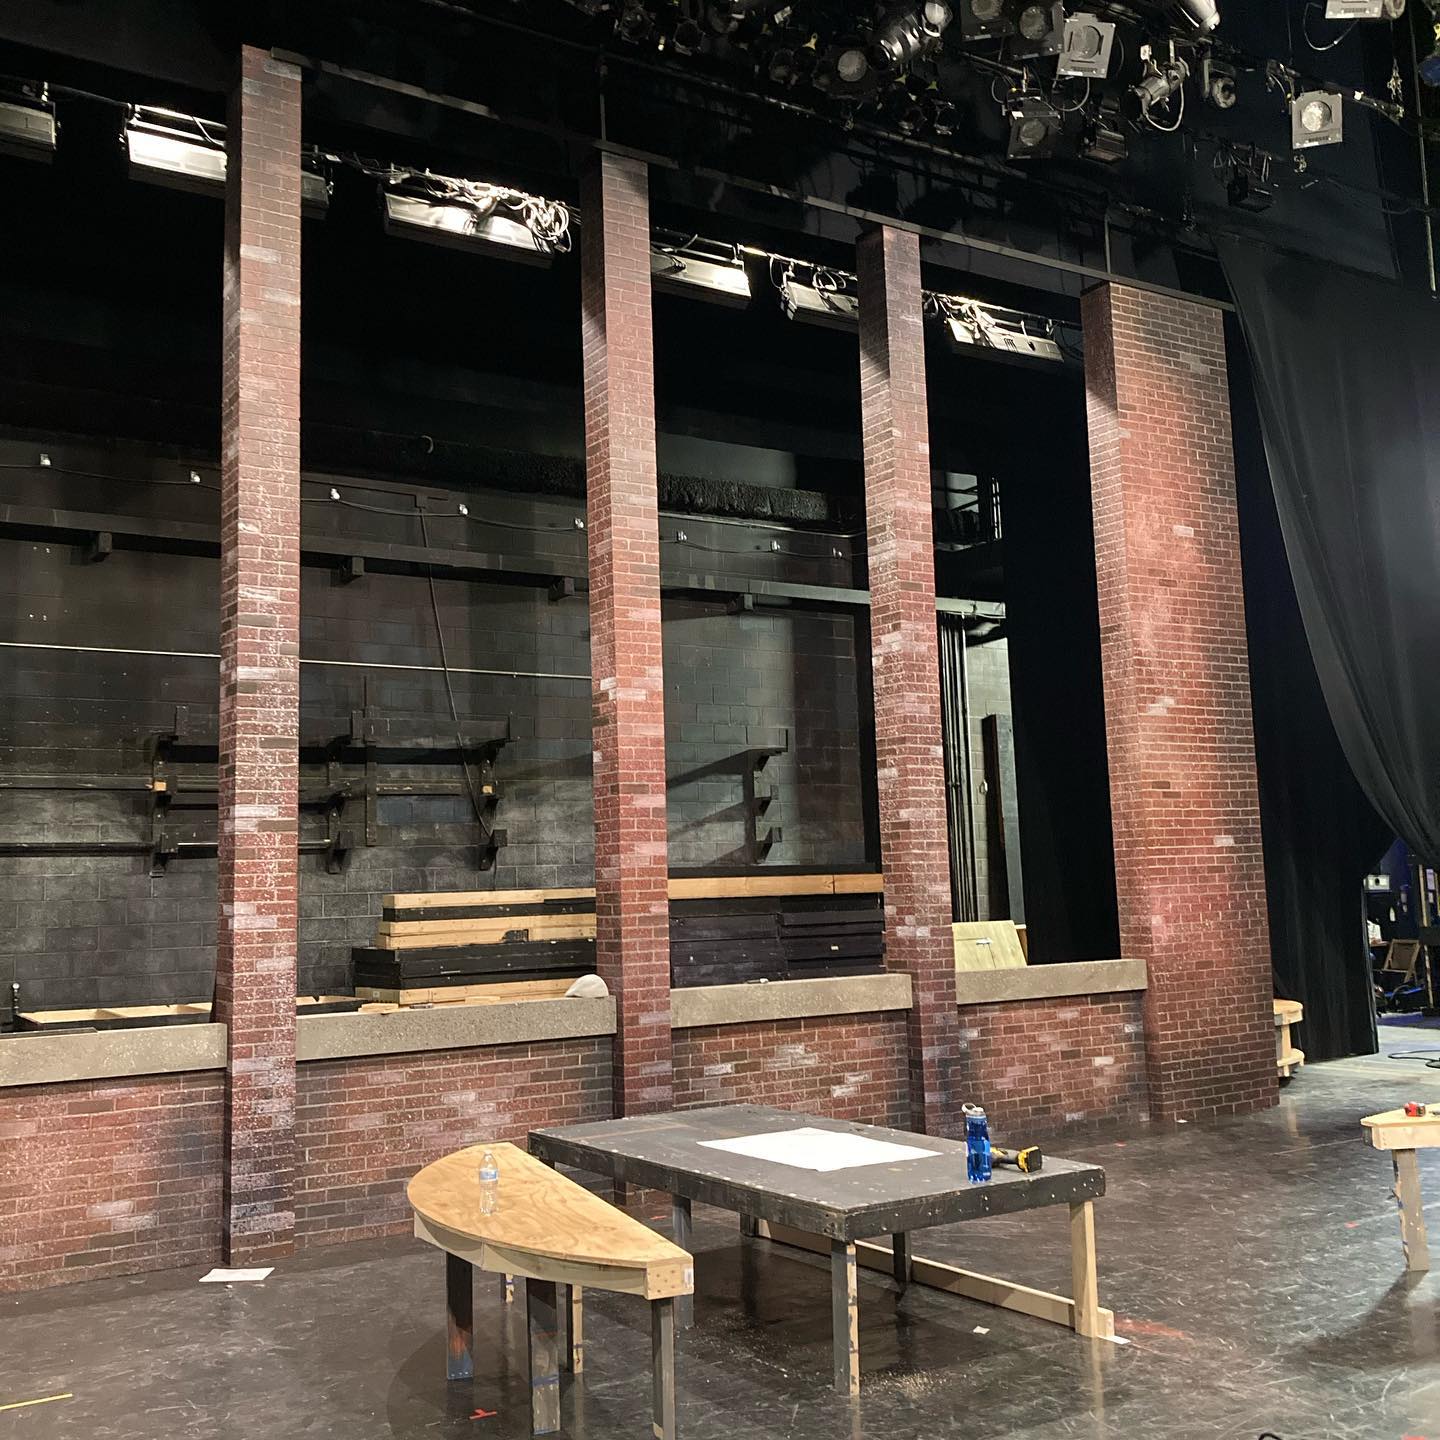 On stage: partial walls painted to look like bricks, with some platforms.